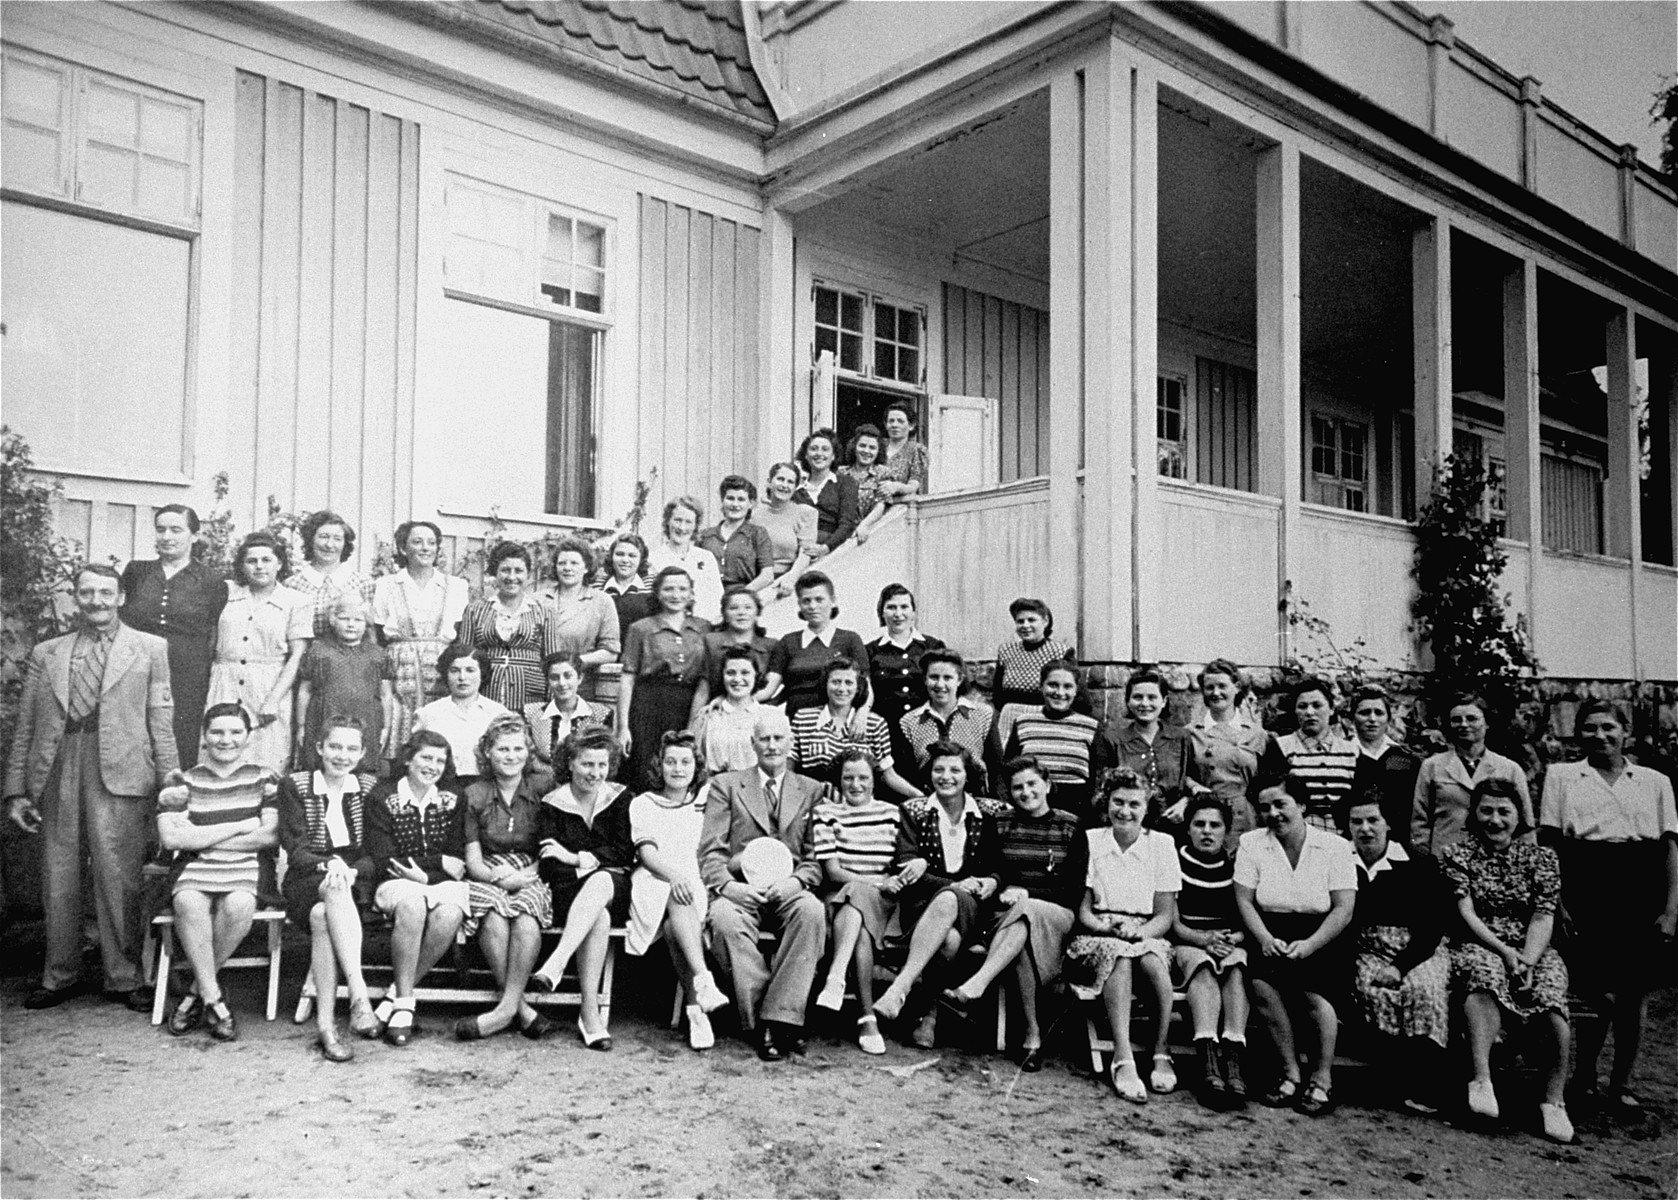 Group portrait of Jewish female survivors of Bergen-Belsen, who were evacuated to Sweden at the end of the war, and are now convalescing at hospital in Stensjoen Nomnekul.

Pictured in the back row, at the base of the stairs and seventh from the right, is the donor's wife, Helen Kaufman.  Originally from Beregasz, in Hungarian-controlled Slovakia, Kaufman was deported to Auschwitz in May 1944.  She was later transferred to Bergen-Belsen, where she was liberated.

Also among those pictured are Barbara (Borbala) Grunstein (third from the left in the front row) and her Ilona Gerendas (second from the left in the first row).